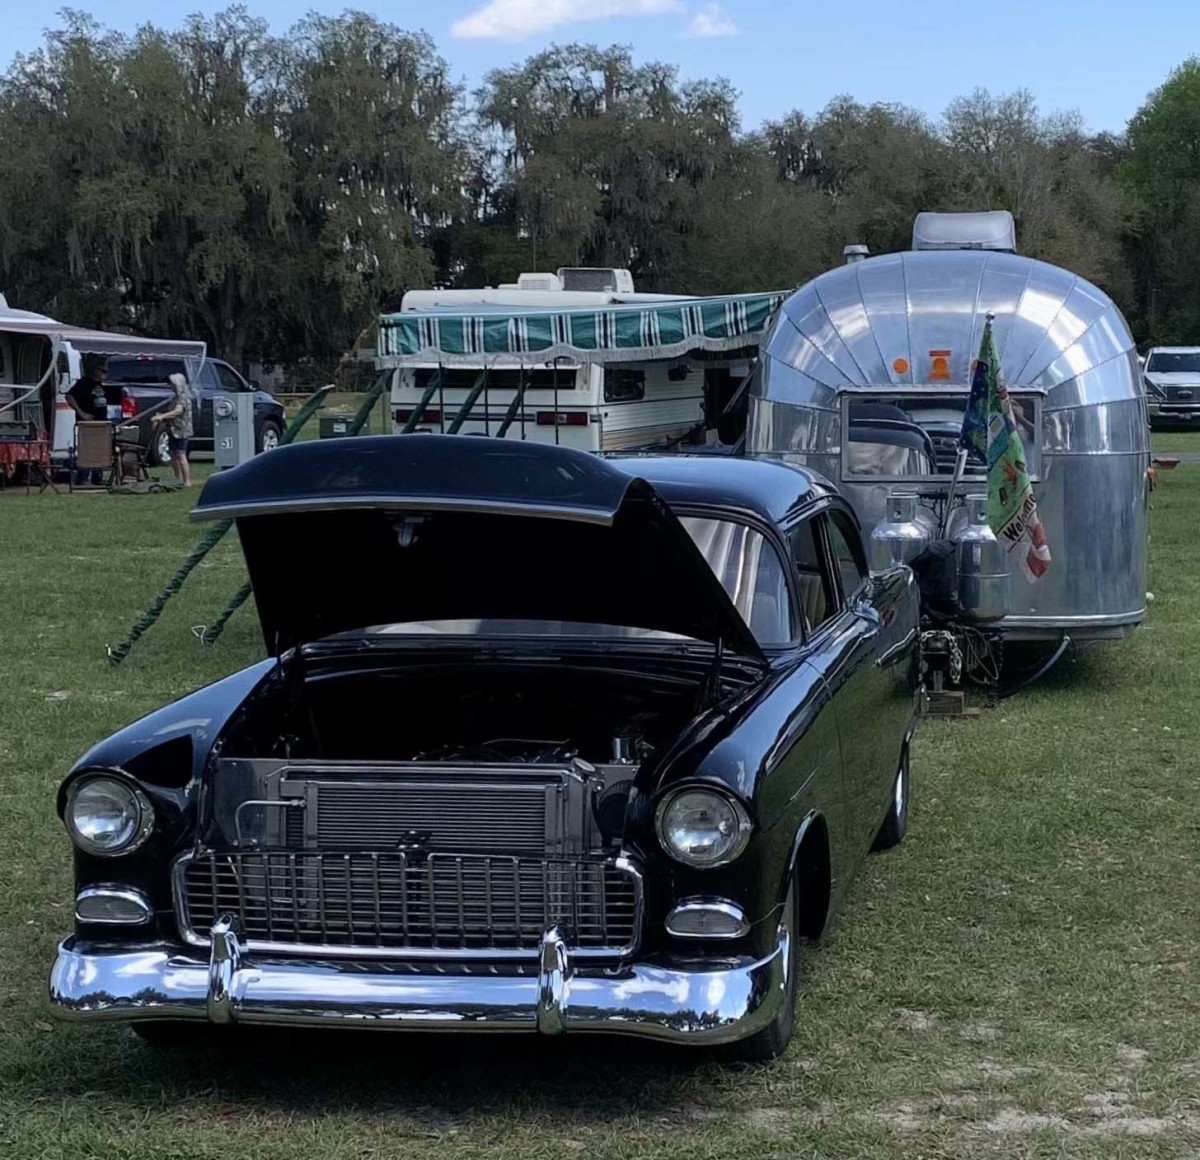 A 1957 Airstream owned by Roger and Bev Reger of Lakeland, Florida, is staged with the Regers’ 1955 Chevrolet 150 Business Coupe. Many vintage trailer owners are also into vintage automobiles.